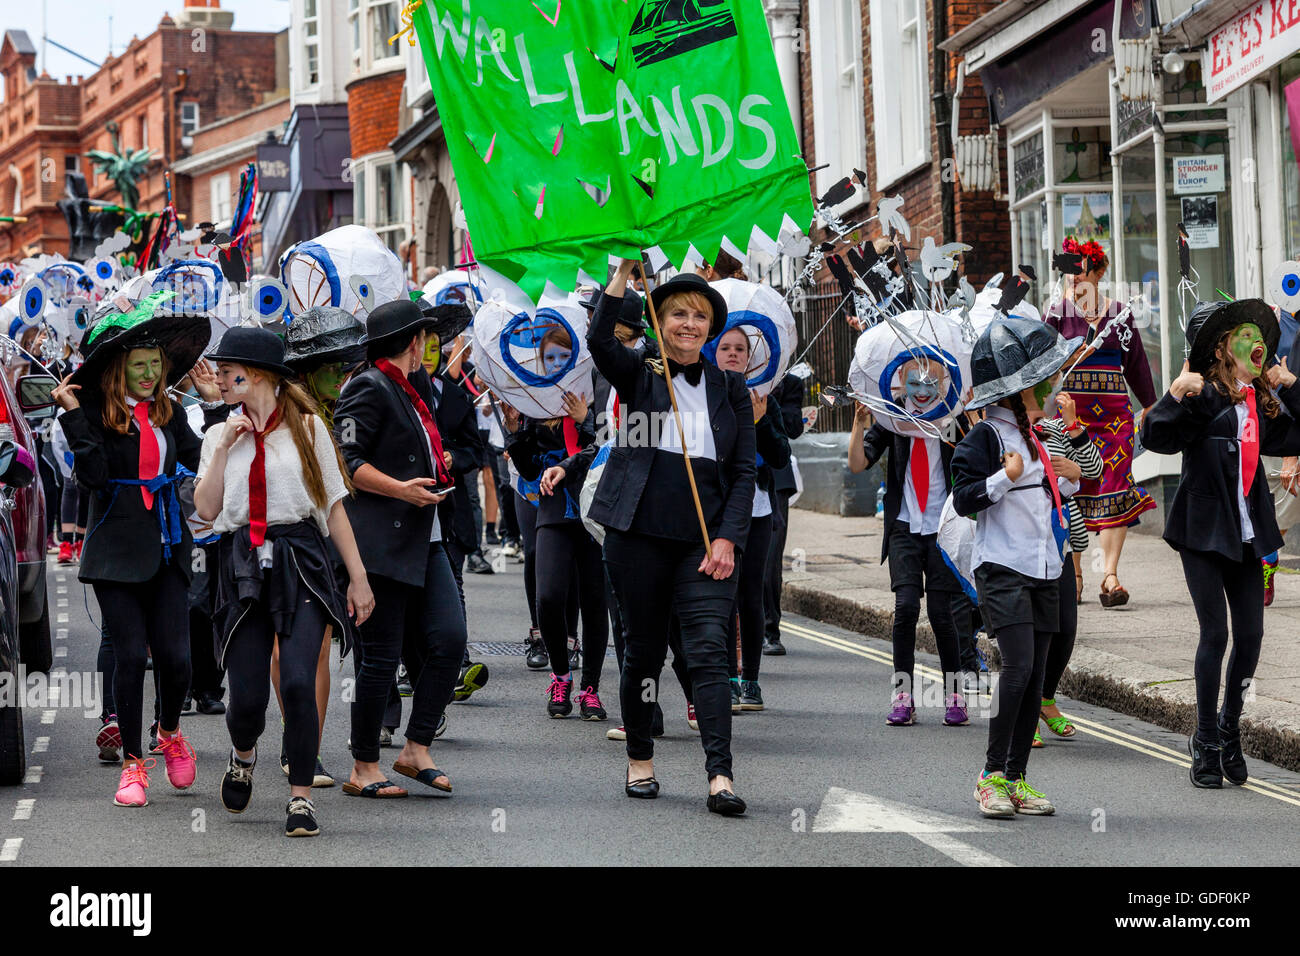 Local Children In Parade Through The Streets Of Lewes During The Annual Schools 'Moving On' Parade, High Street, Lewes, UK Stock Photo